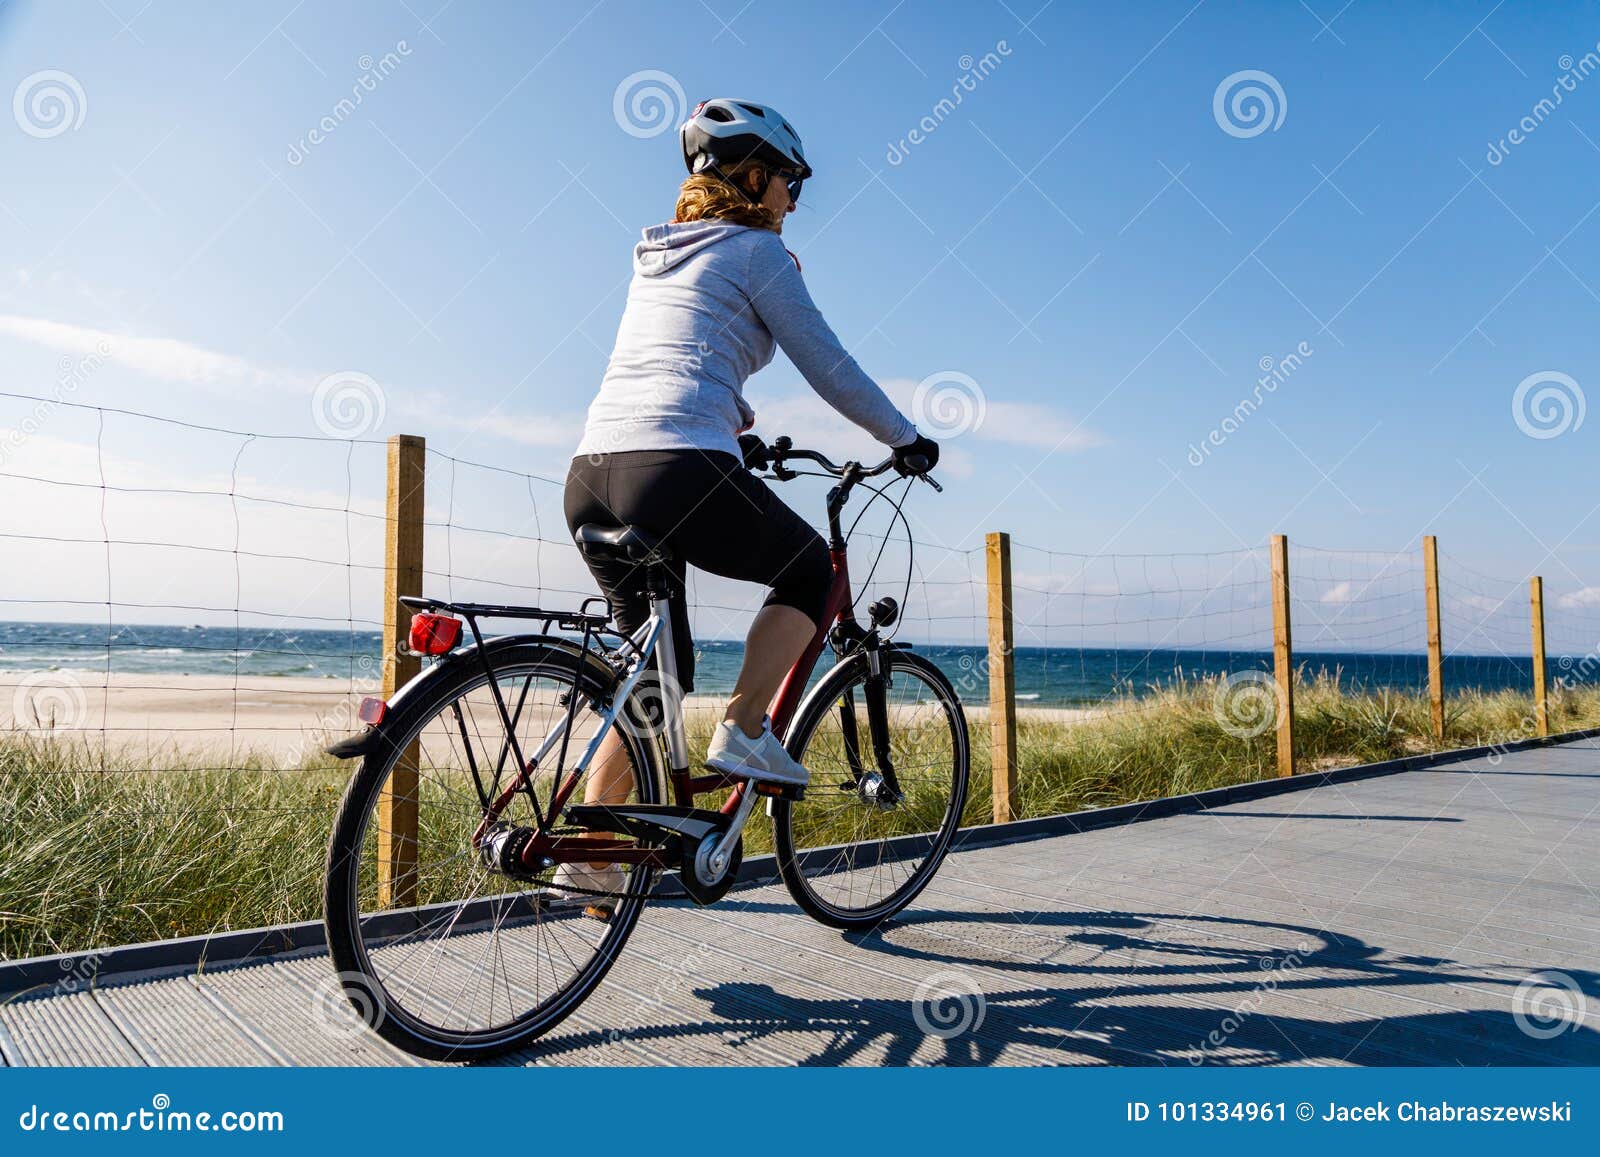 Healthy Lifestyle Mid Aged Woman Riding Bicycles Stock Image Image Of Girl Bicyclist 101334961